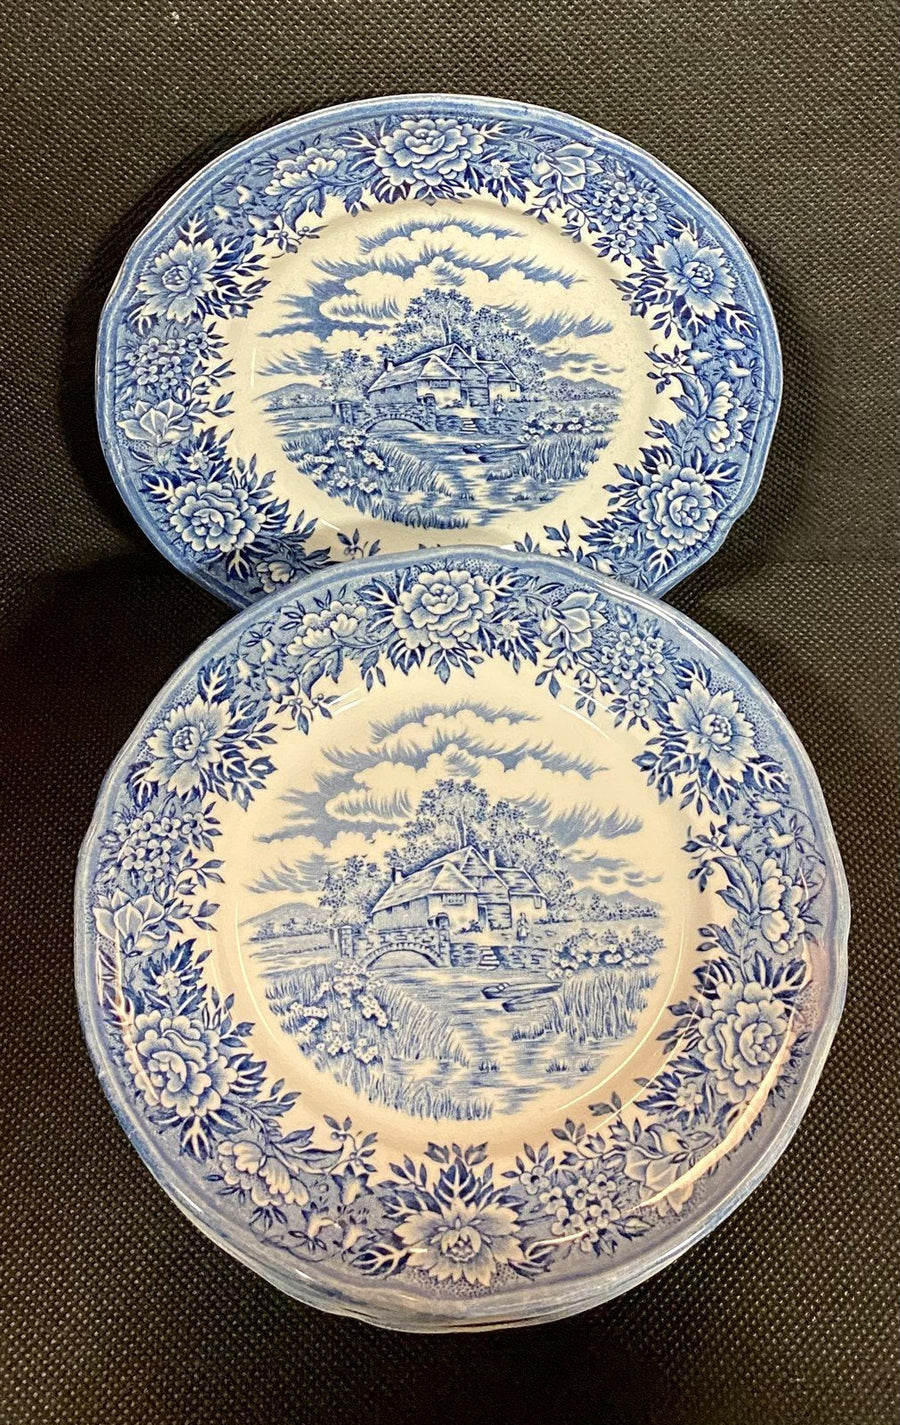 10 Bread Plates by Salem China Co. in Colonial / English Village Pattern